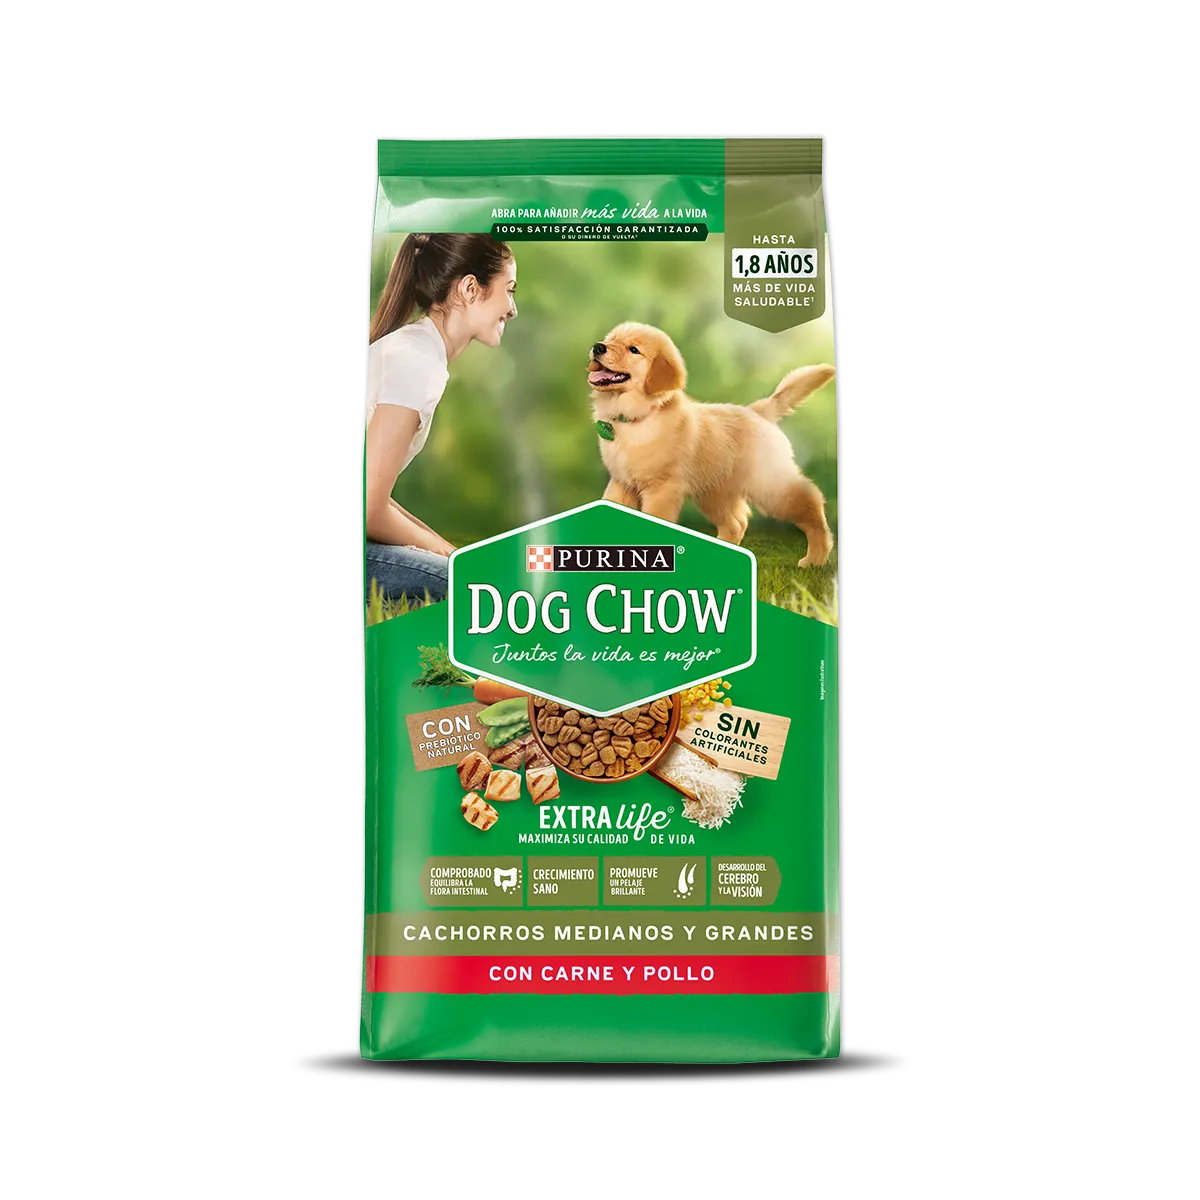 Purina-DogChow-chachorro-colombia.png.webp